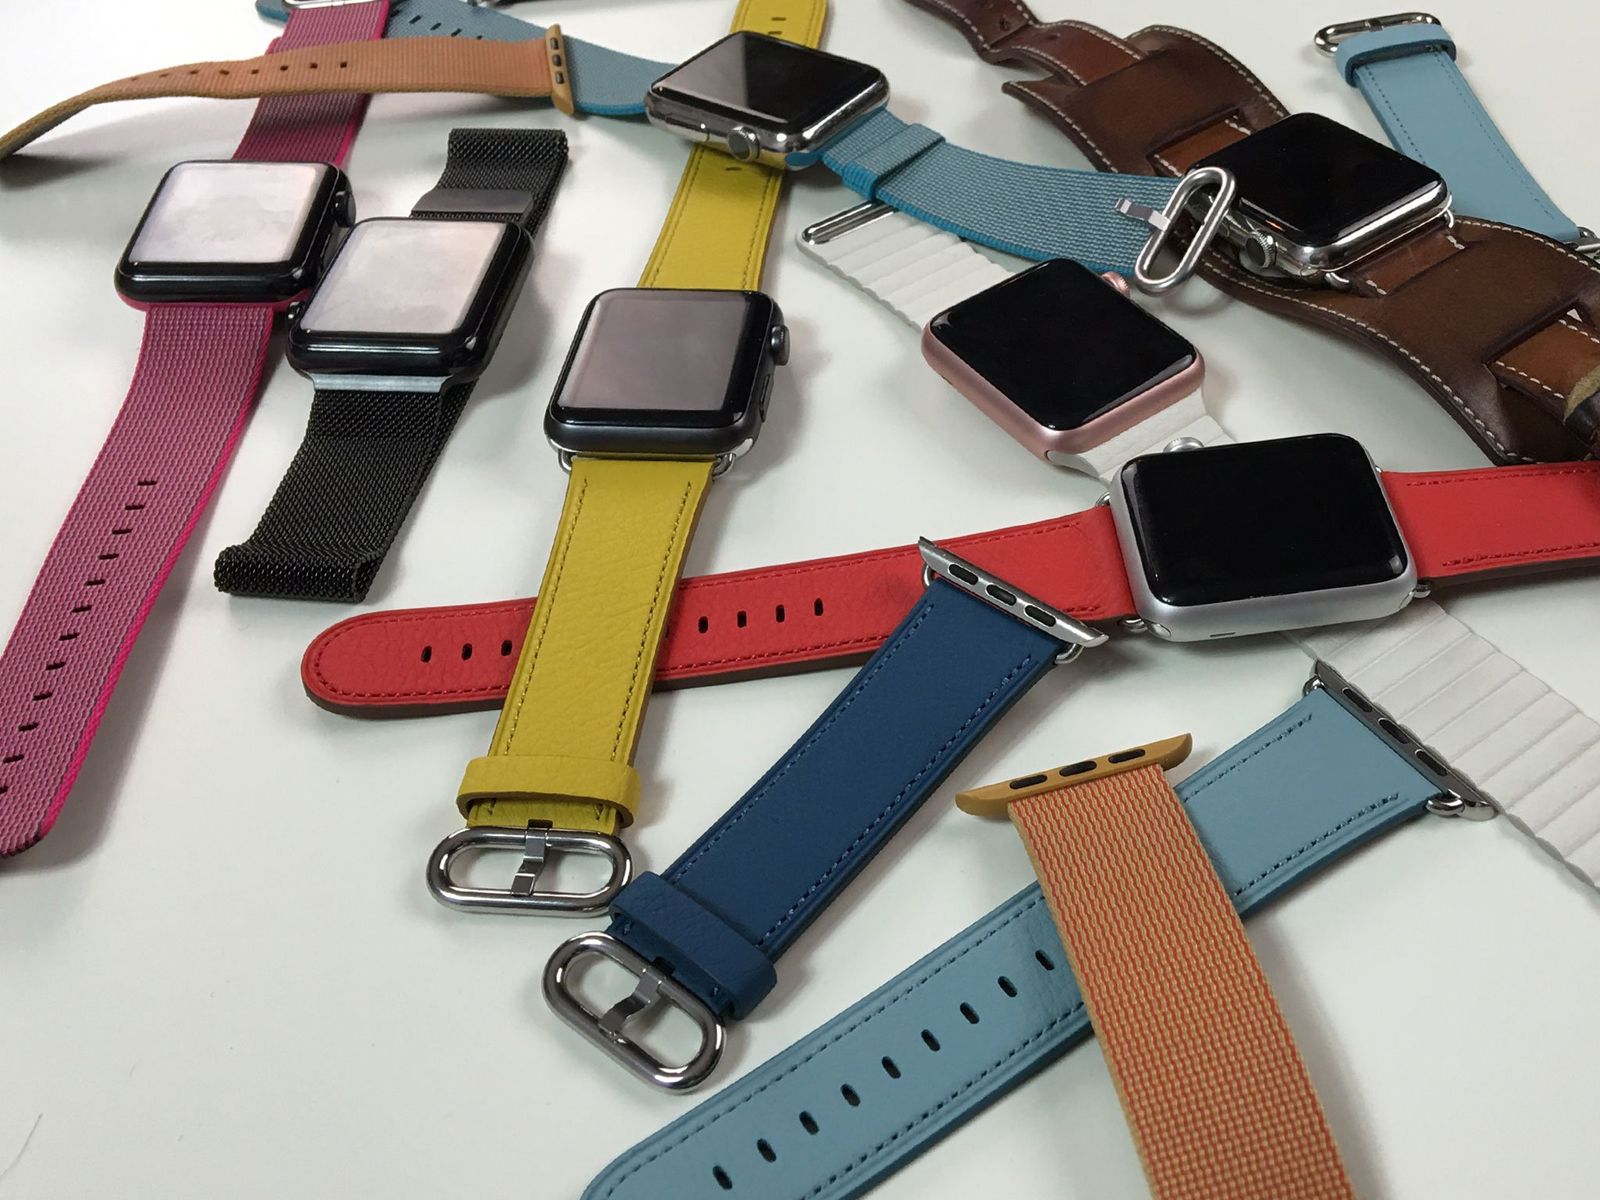 Best Apple Watch Bands in 2020 | iMore